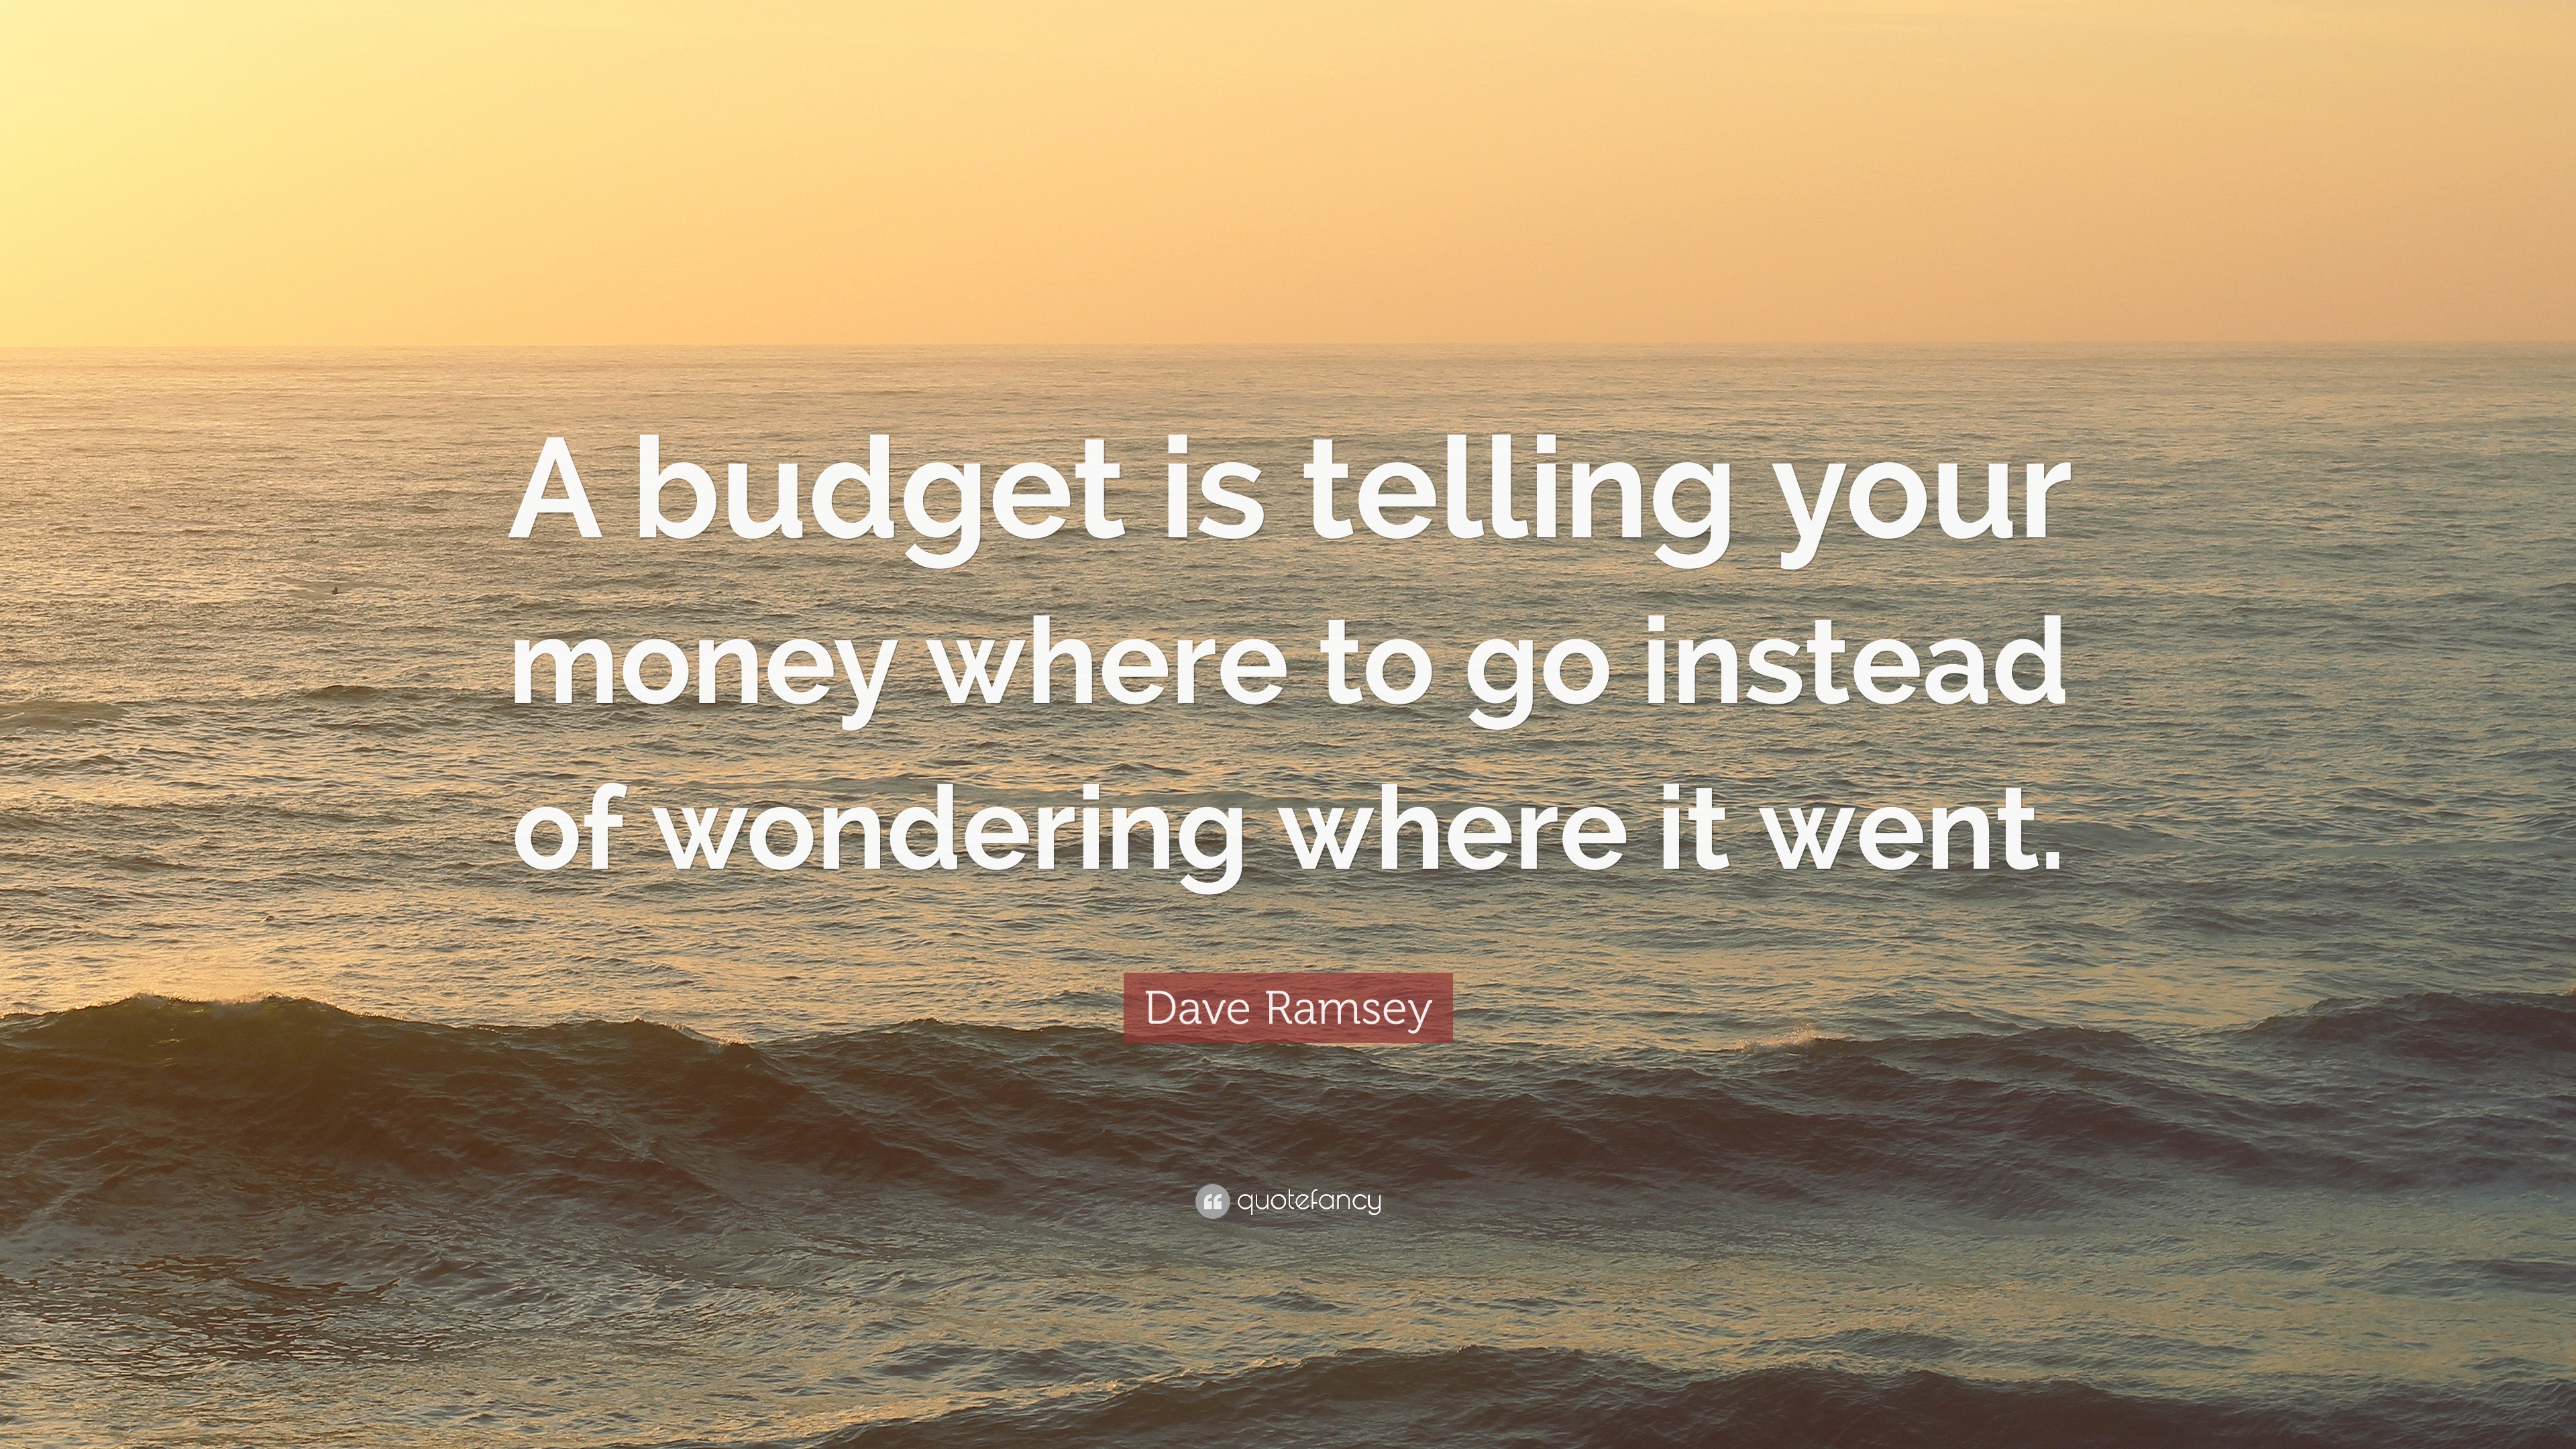 dave-ramsey-quote-a-budget-is-telling-your-money-where-to-go-instead-of-wondering-where-it-went